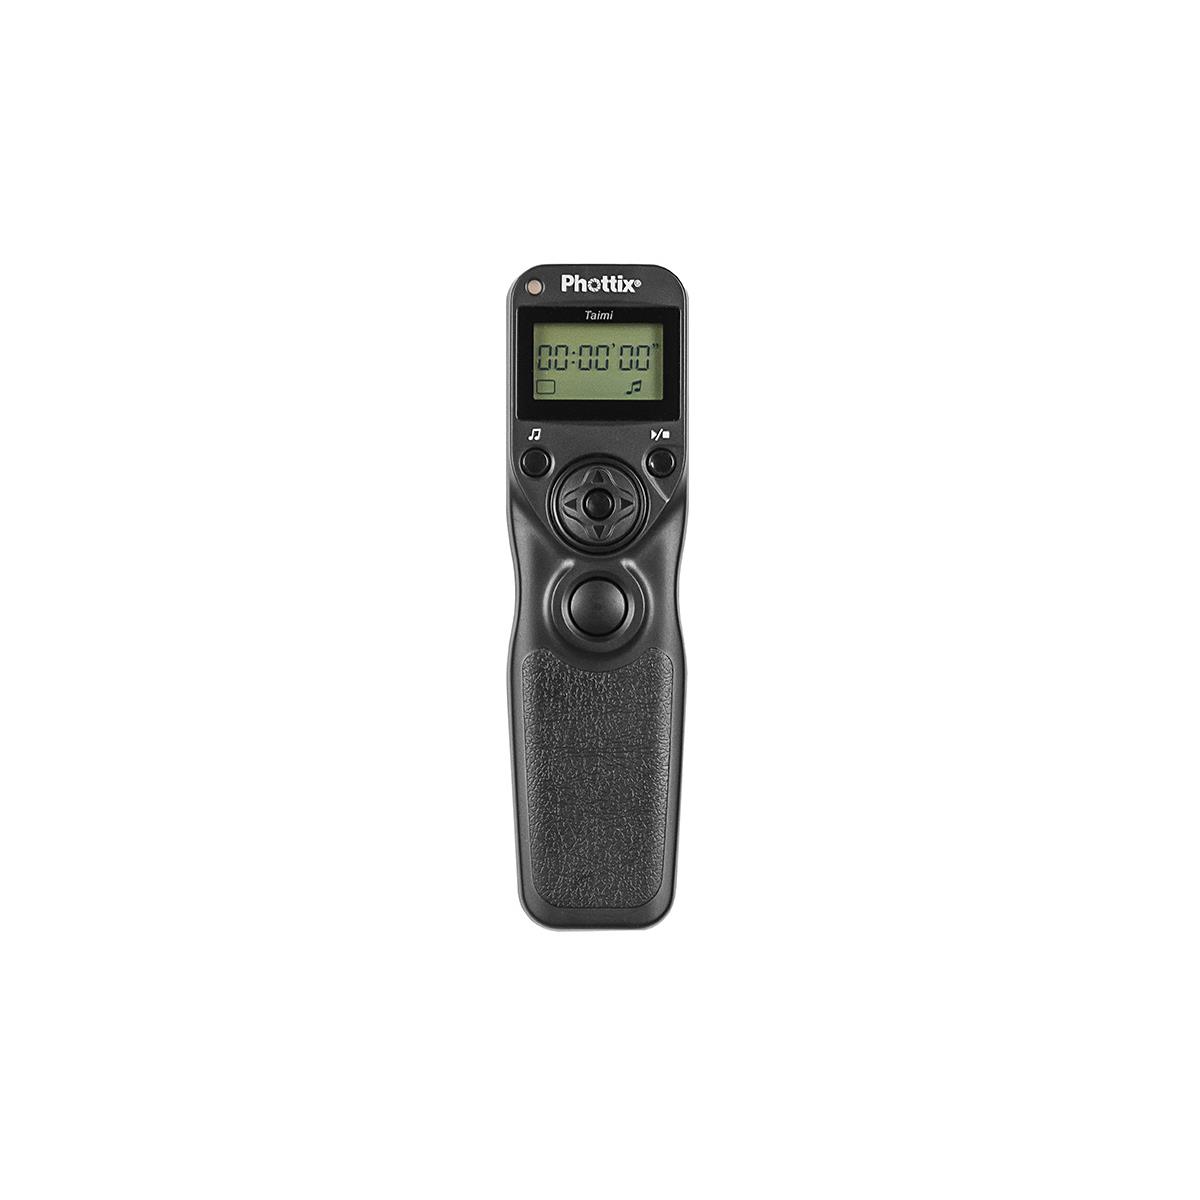 Phottix All-In-One Digital Timer & Wired Remote